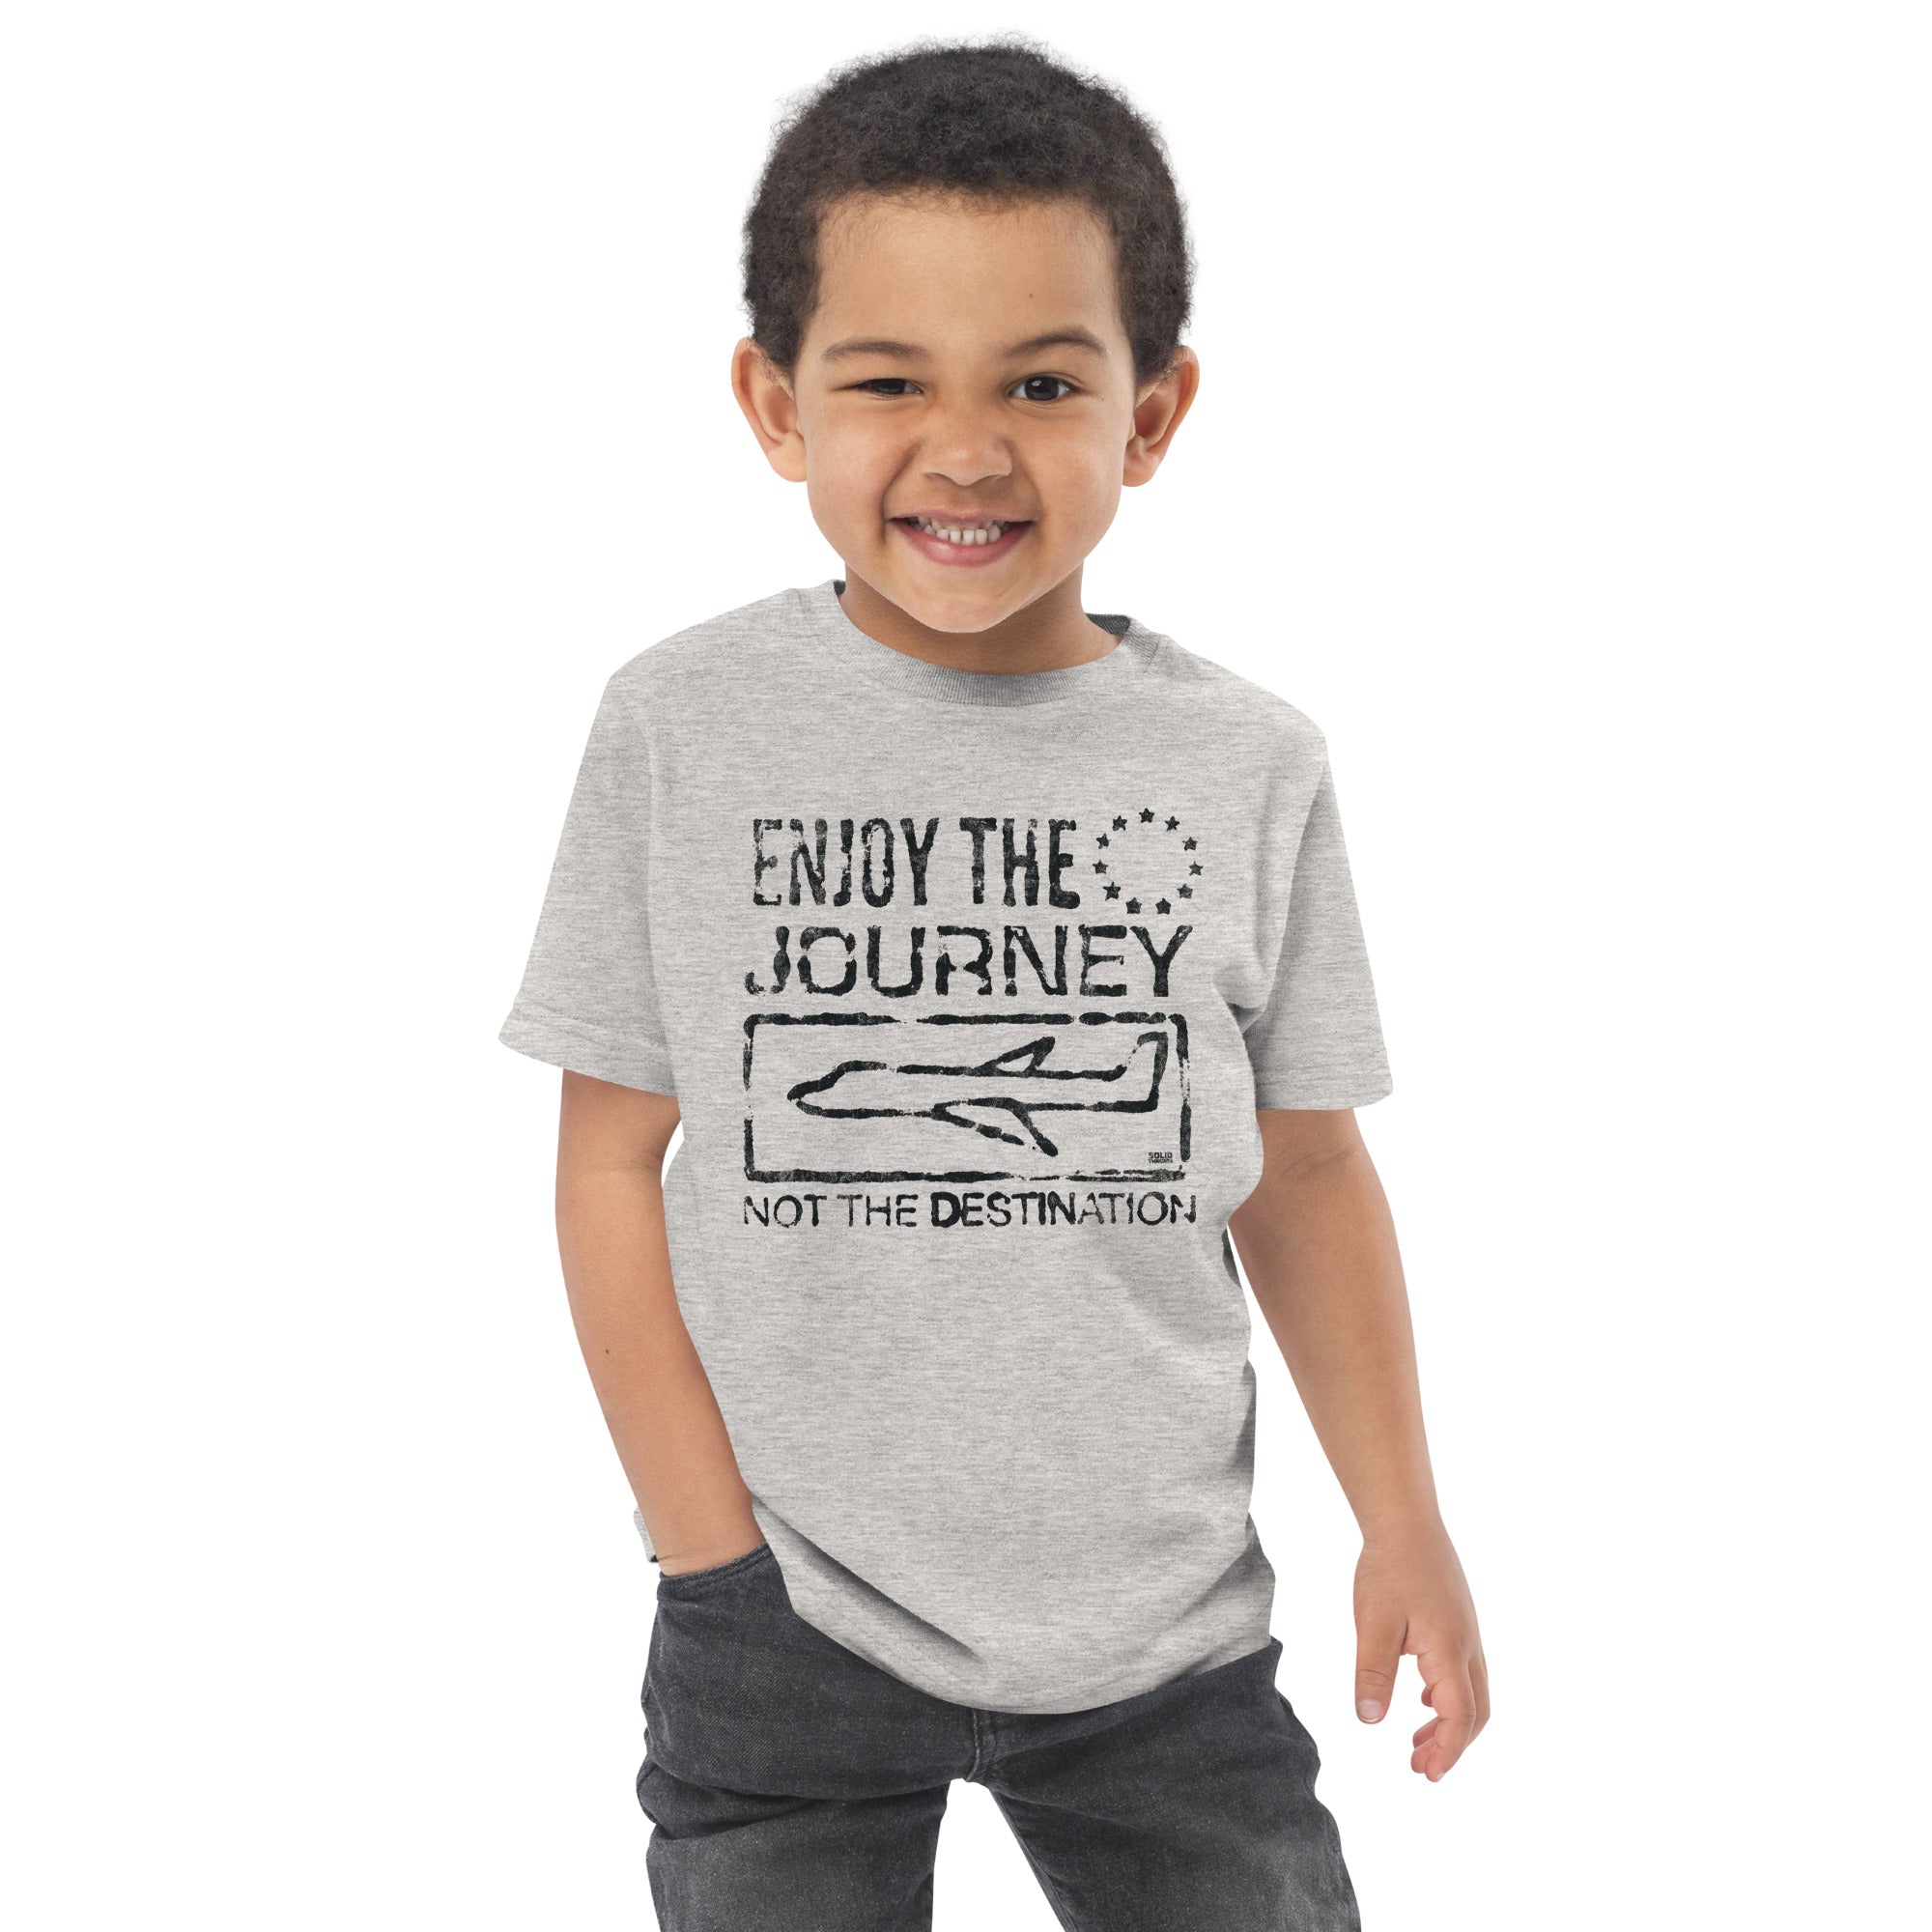 Youth Enjoy Journey Cool Airplane Extra Soft T-Shirt | Cute Travel Kids Tee Boy Model | Solid Threads